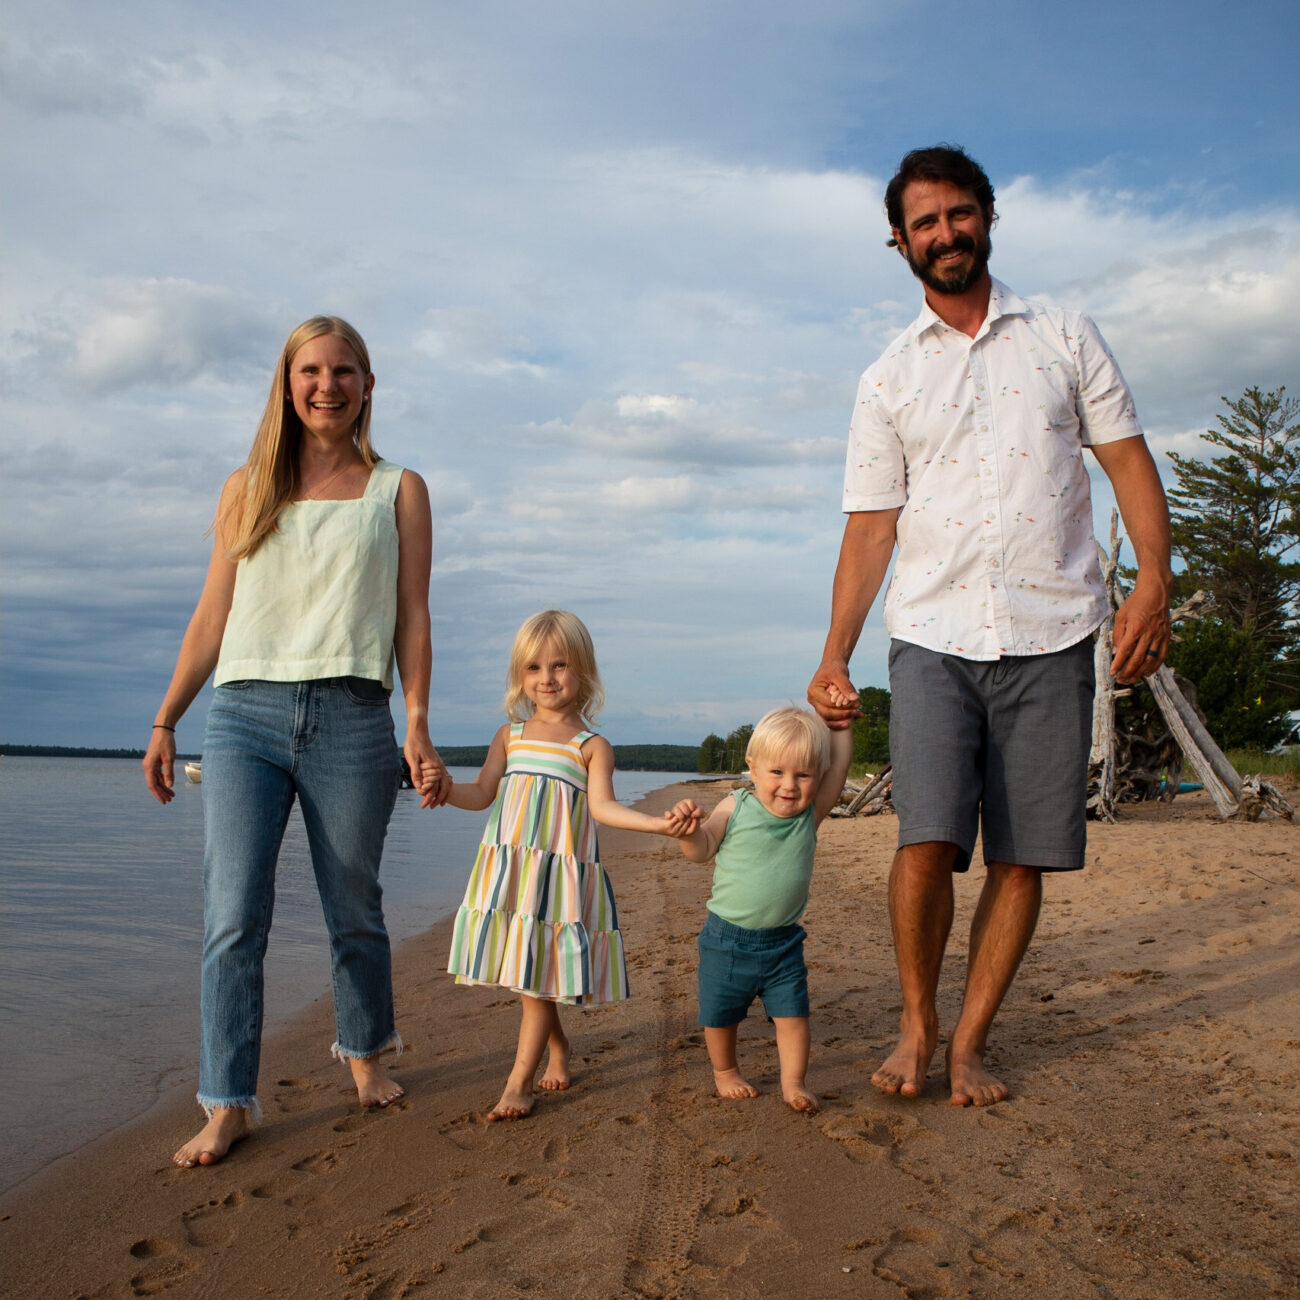 Functional Medicine Provider Alison Percowycz, MSN, FNP-C with her husband and two children smiling on a beach